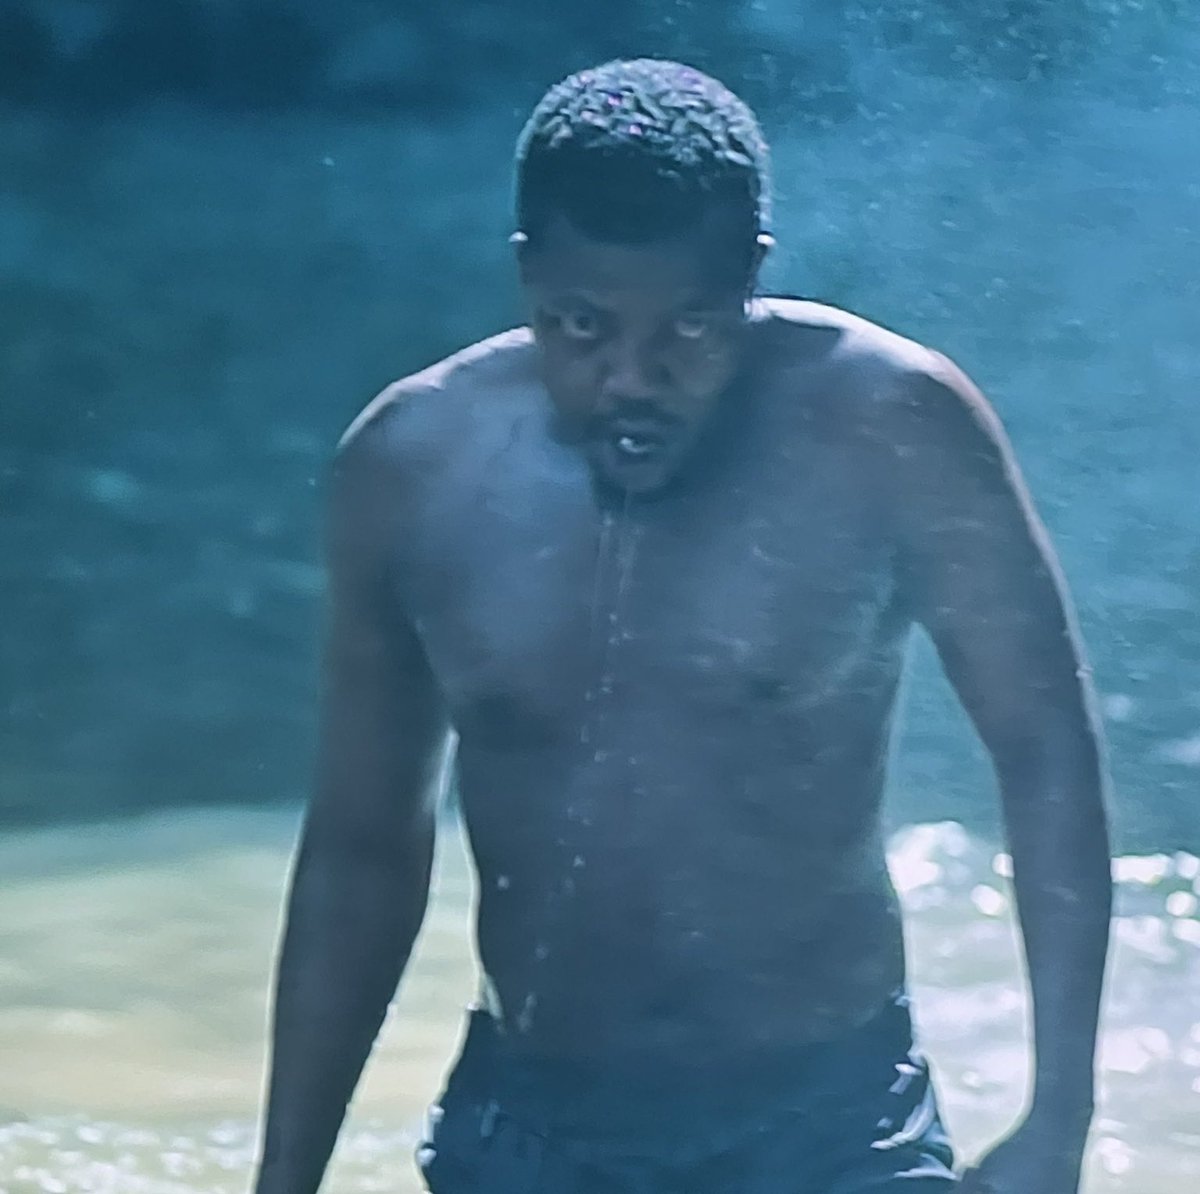 Mlungisi coming out of the water like chadwick boseman on Black Panther

#UmkhokhaTheCurse https://t.co/Bh9vQ17yYK